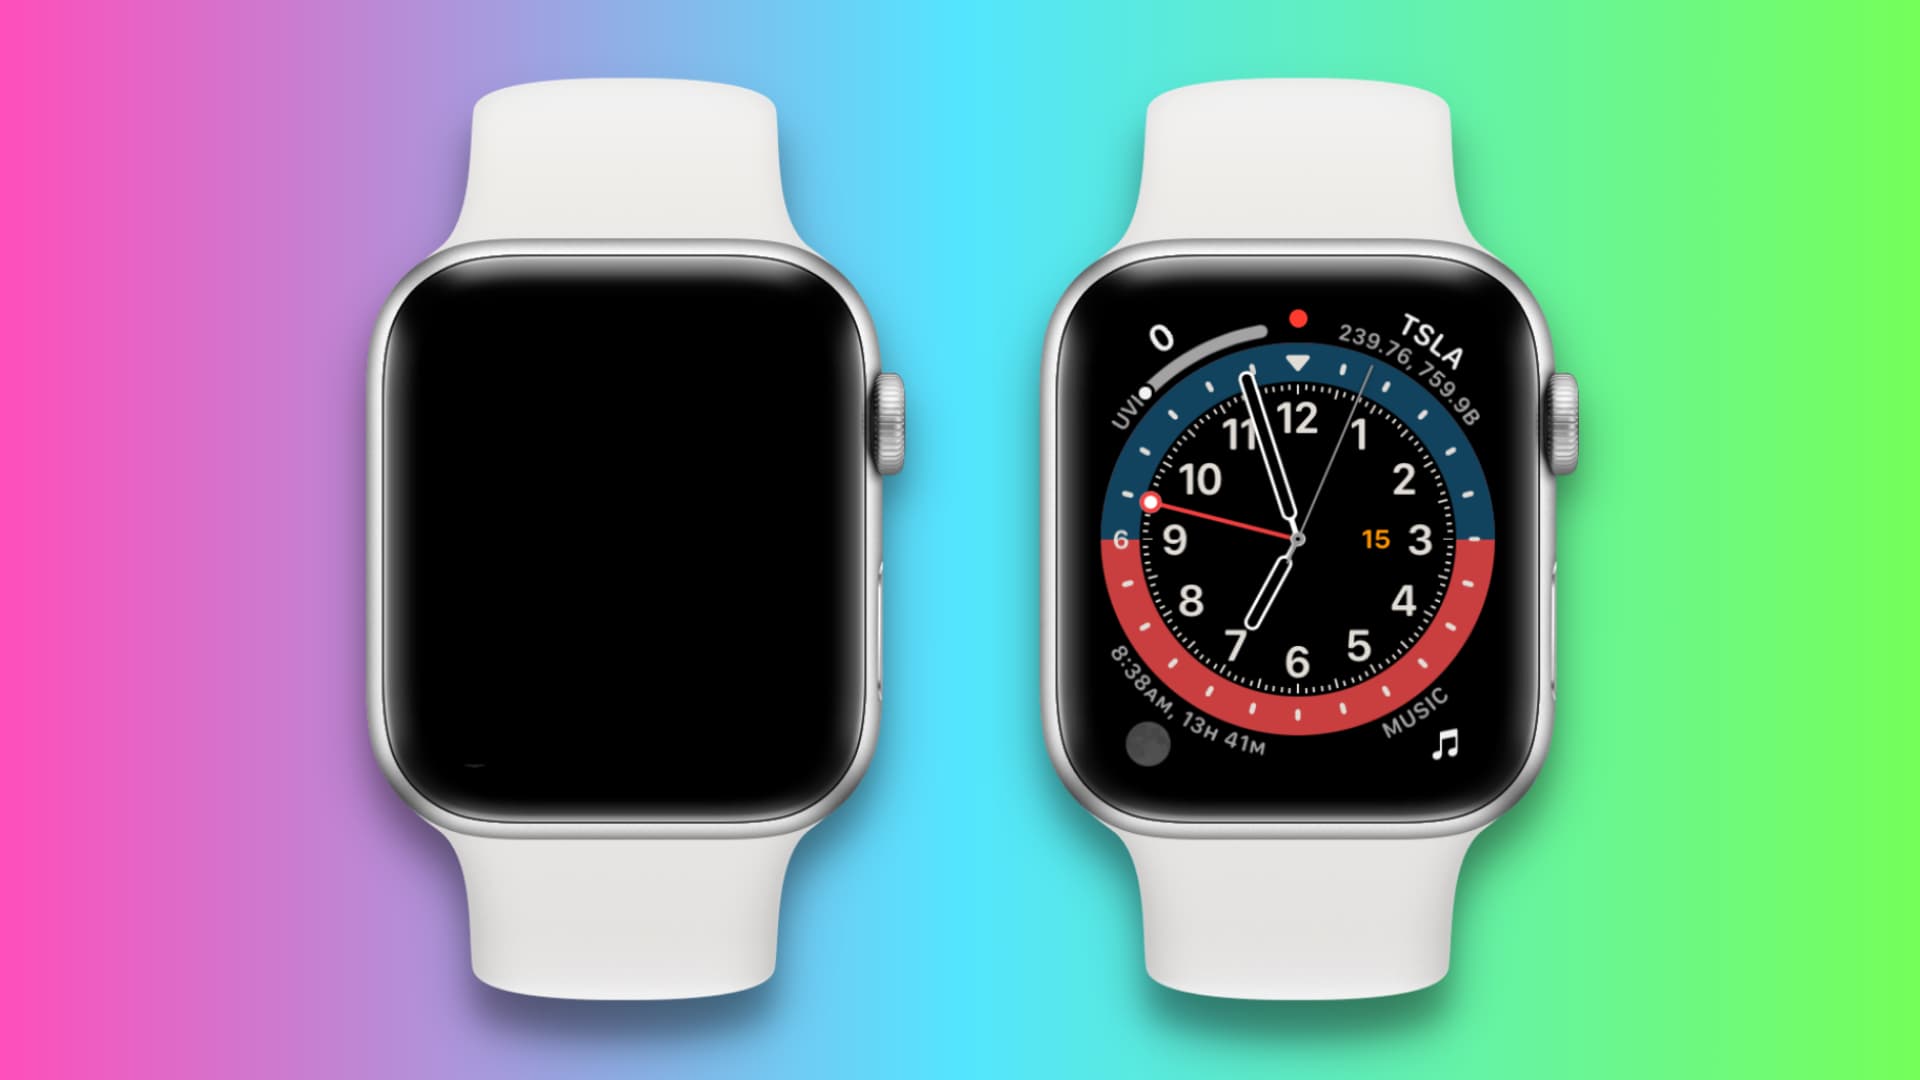 Two Apple Watch mockups, with one showing its screen blacked out and another showing the watch face